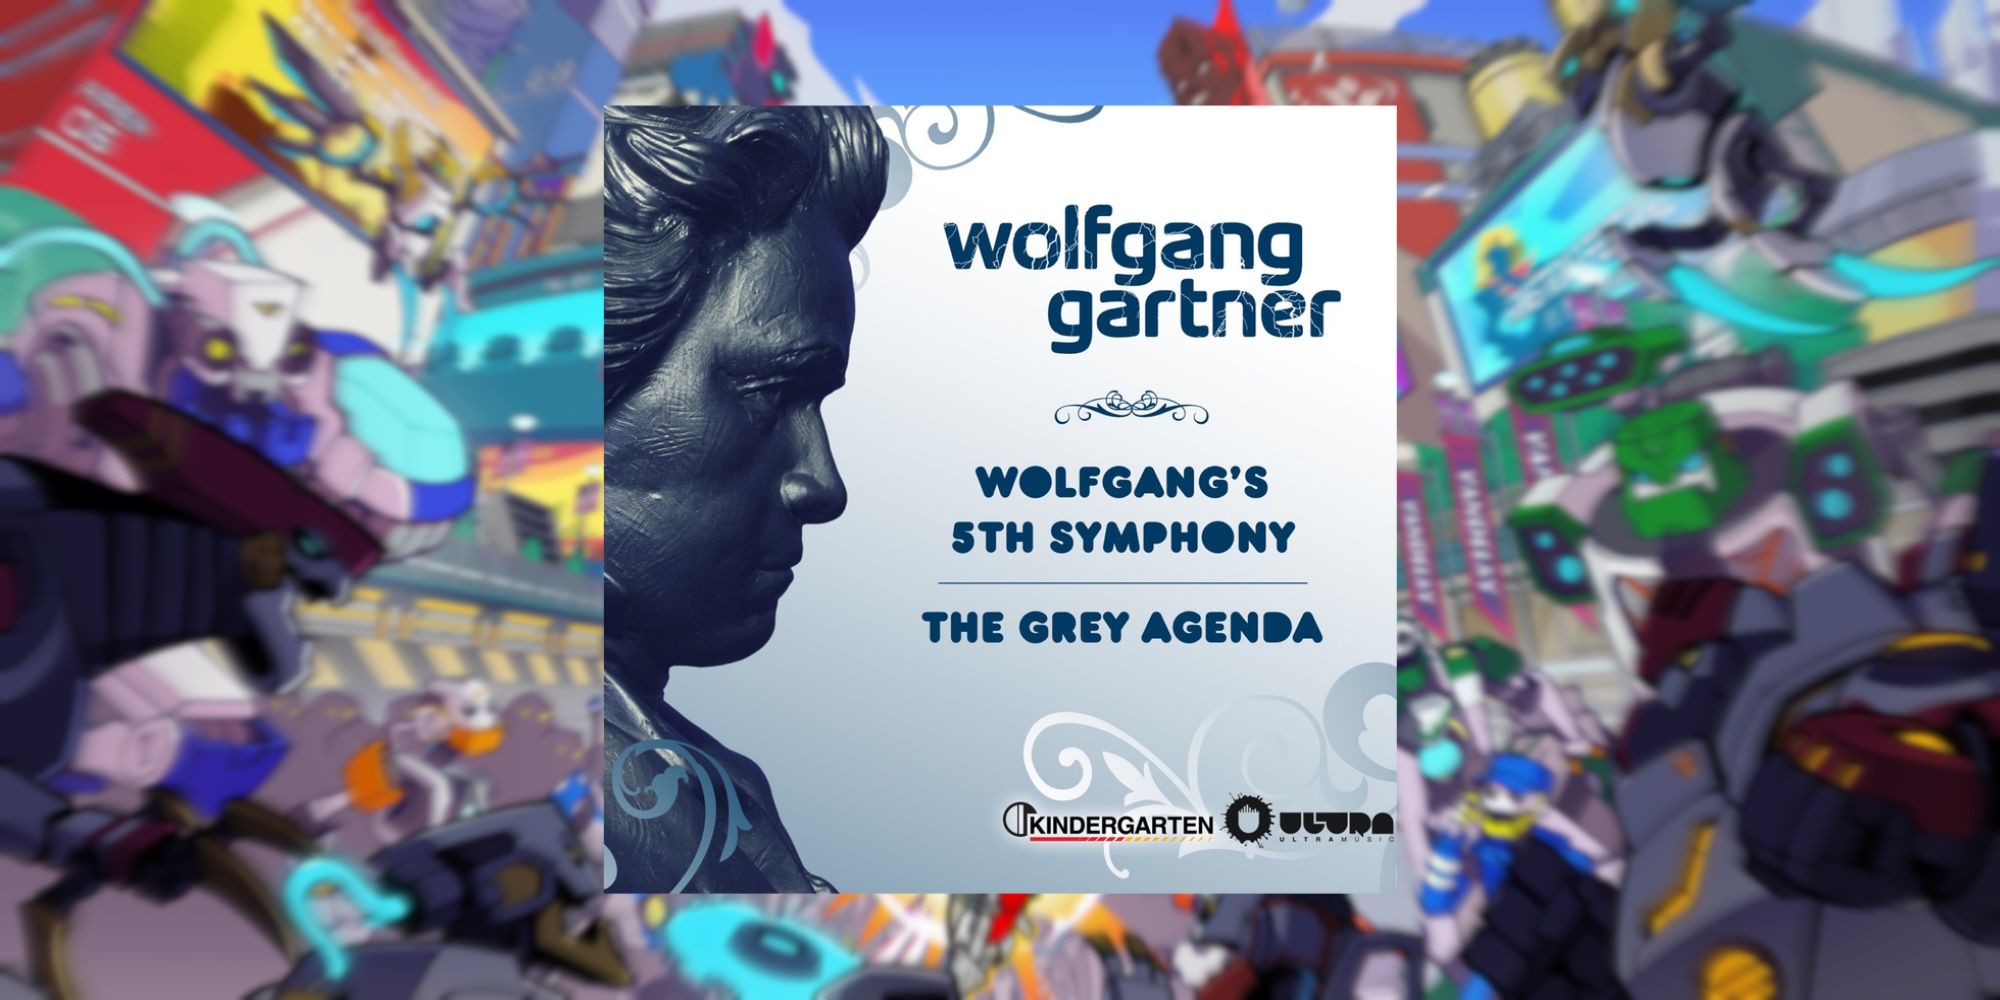 The album cover for Wolfgang 5th Symphony